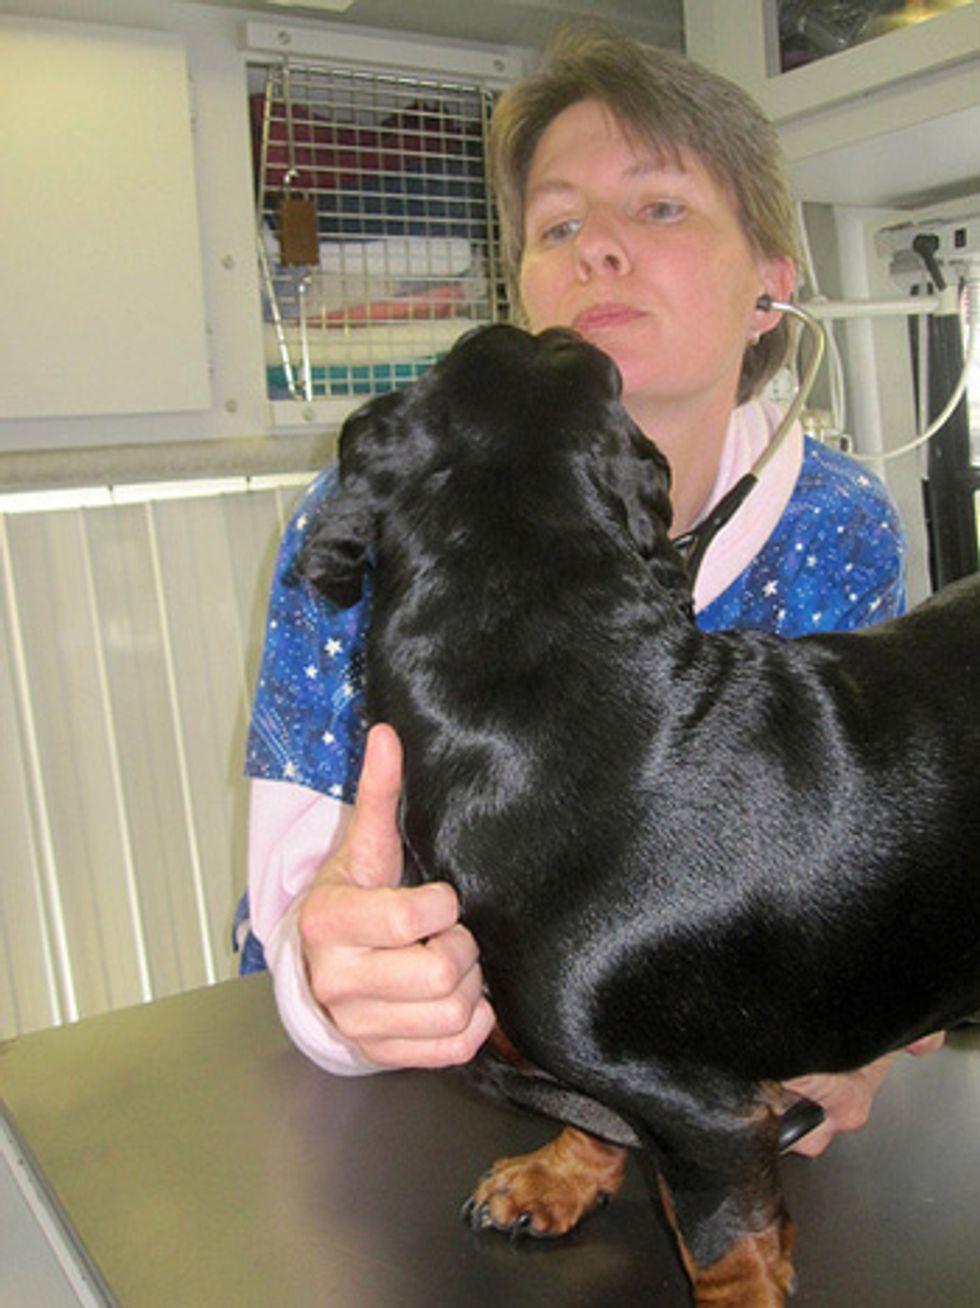 Ask A Vet: How To Calm Your Nerves (And Your Dog's) at the Vet's